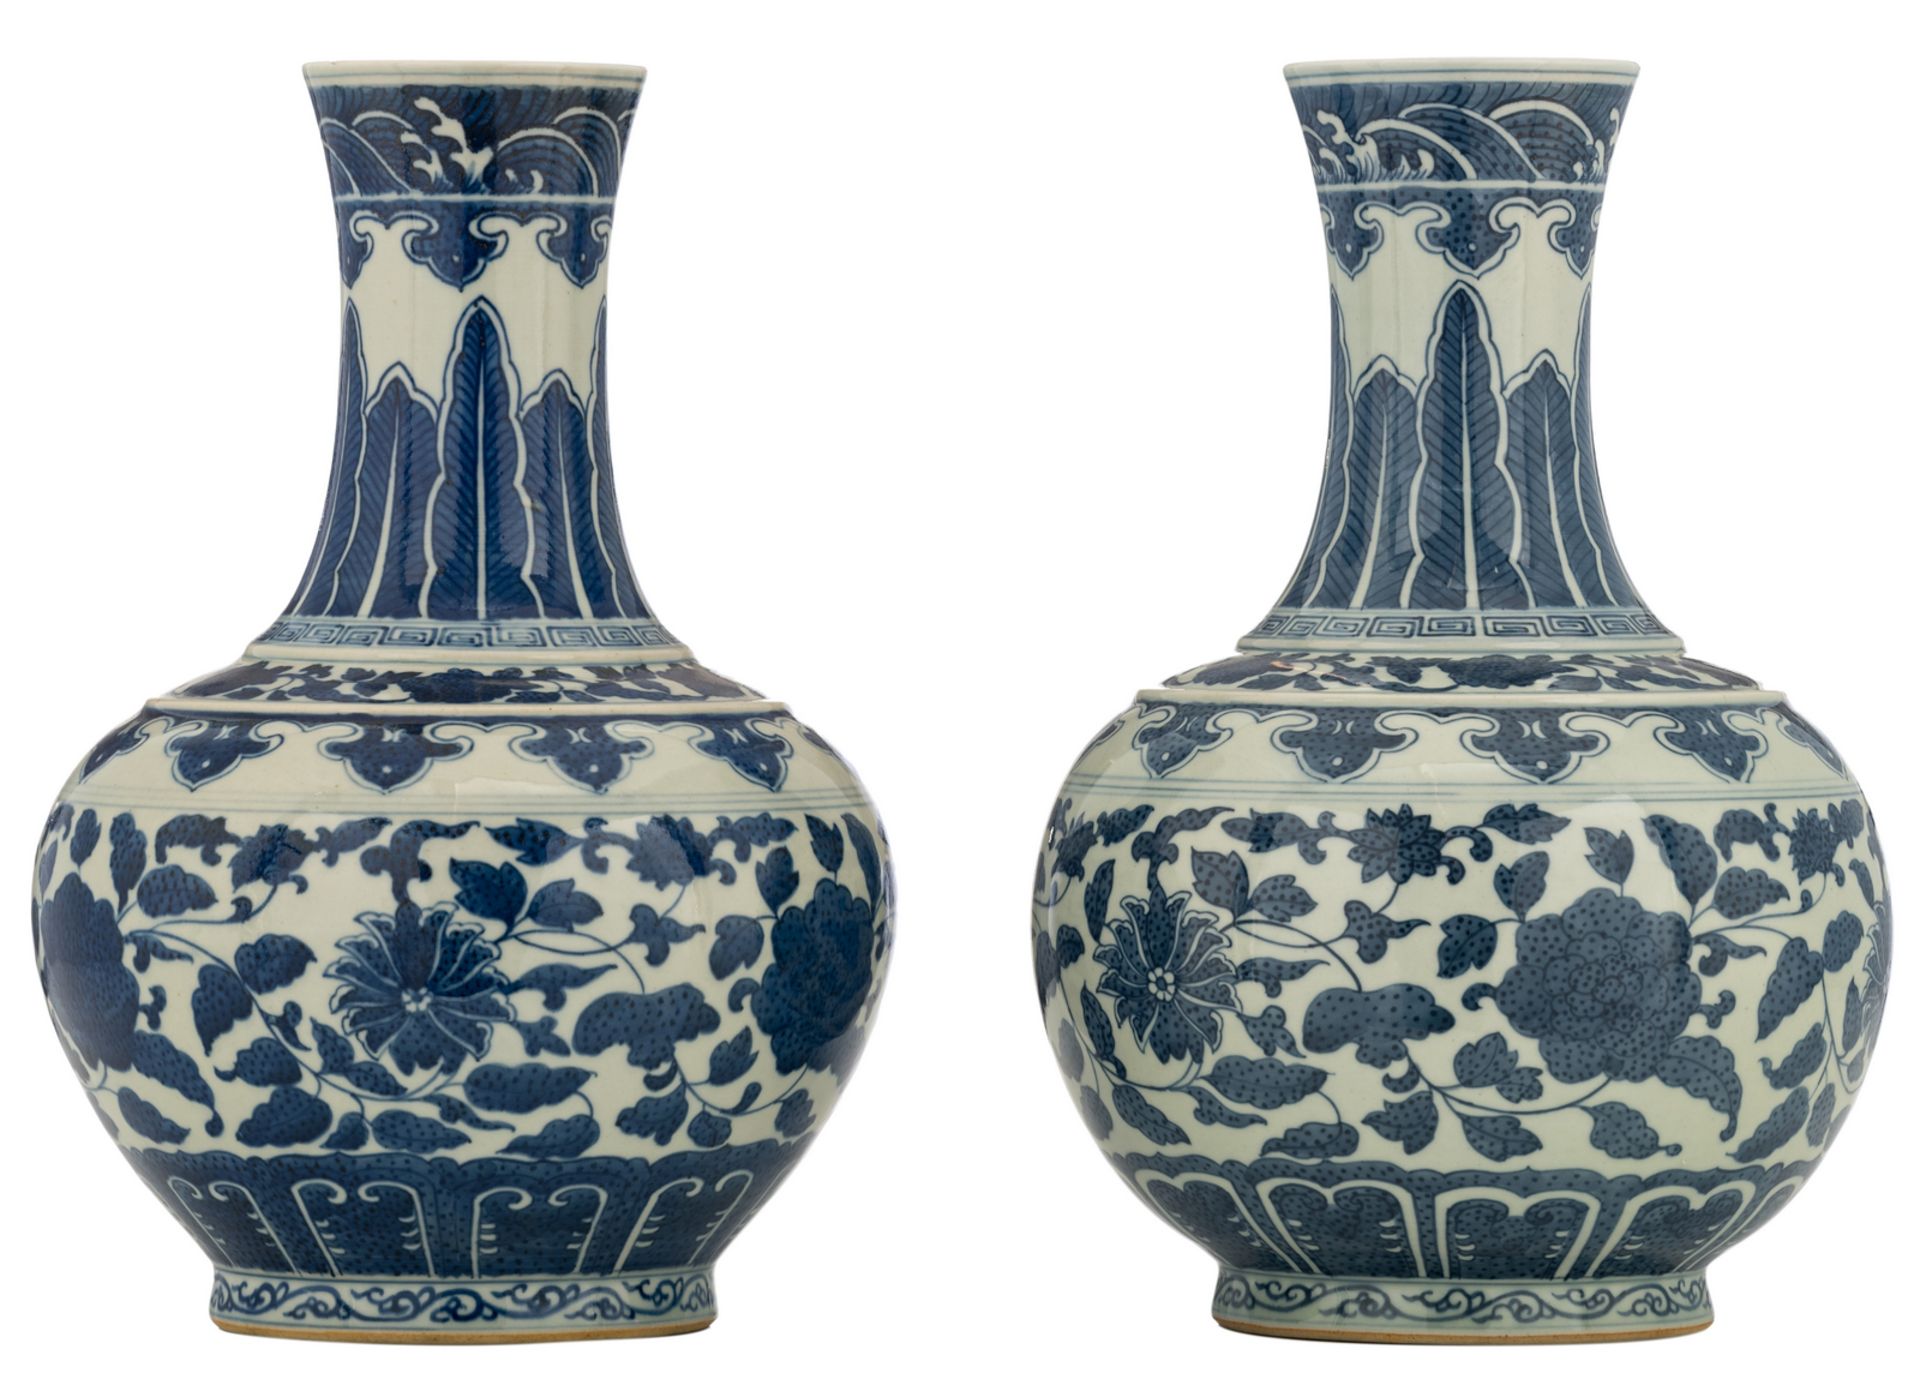 Two Chinese blue and white floral decorated bottle vases, with a Tongzhi mark, H 34 cm